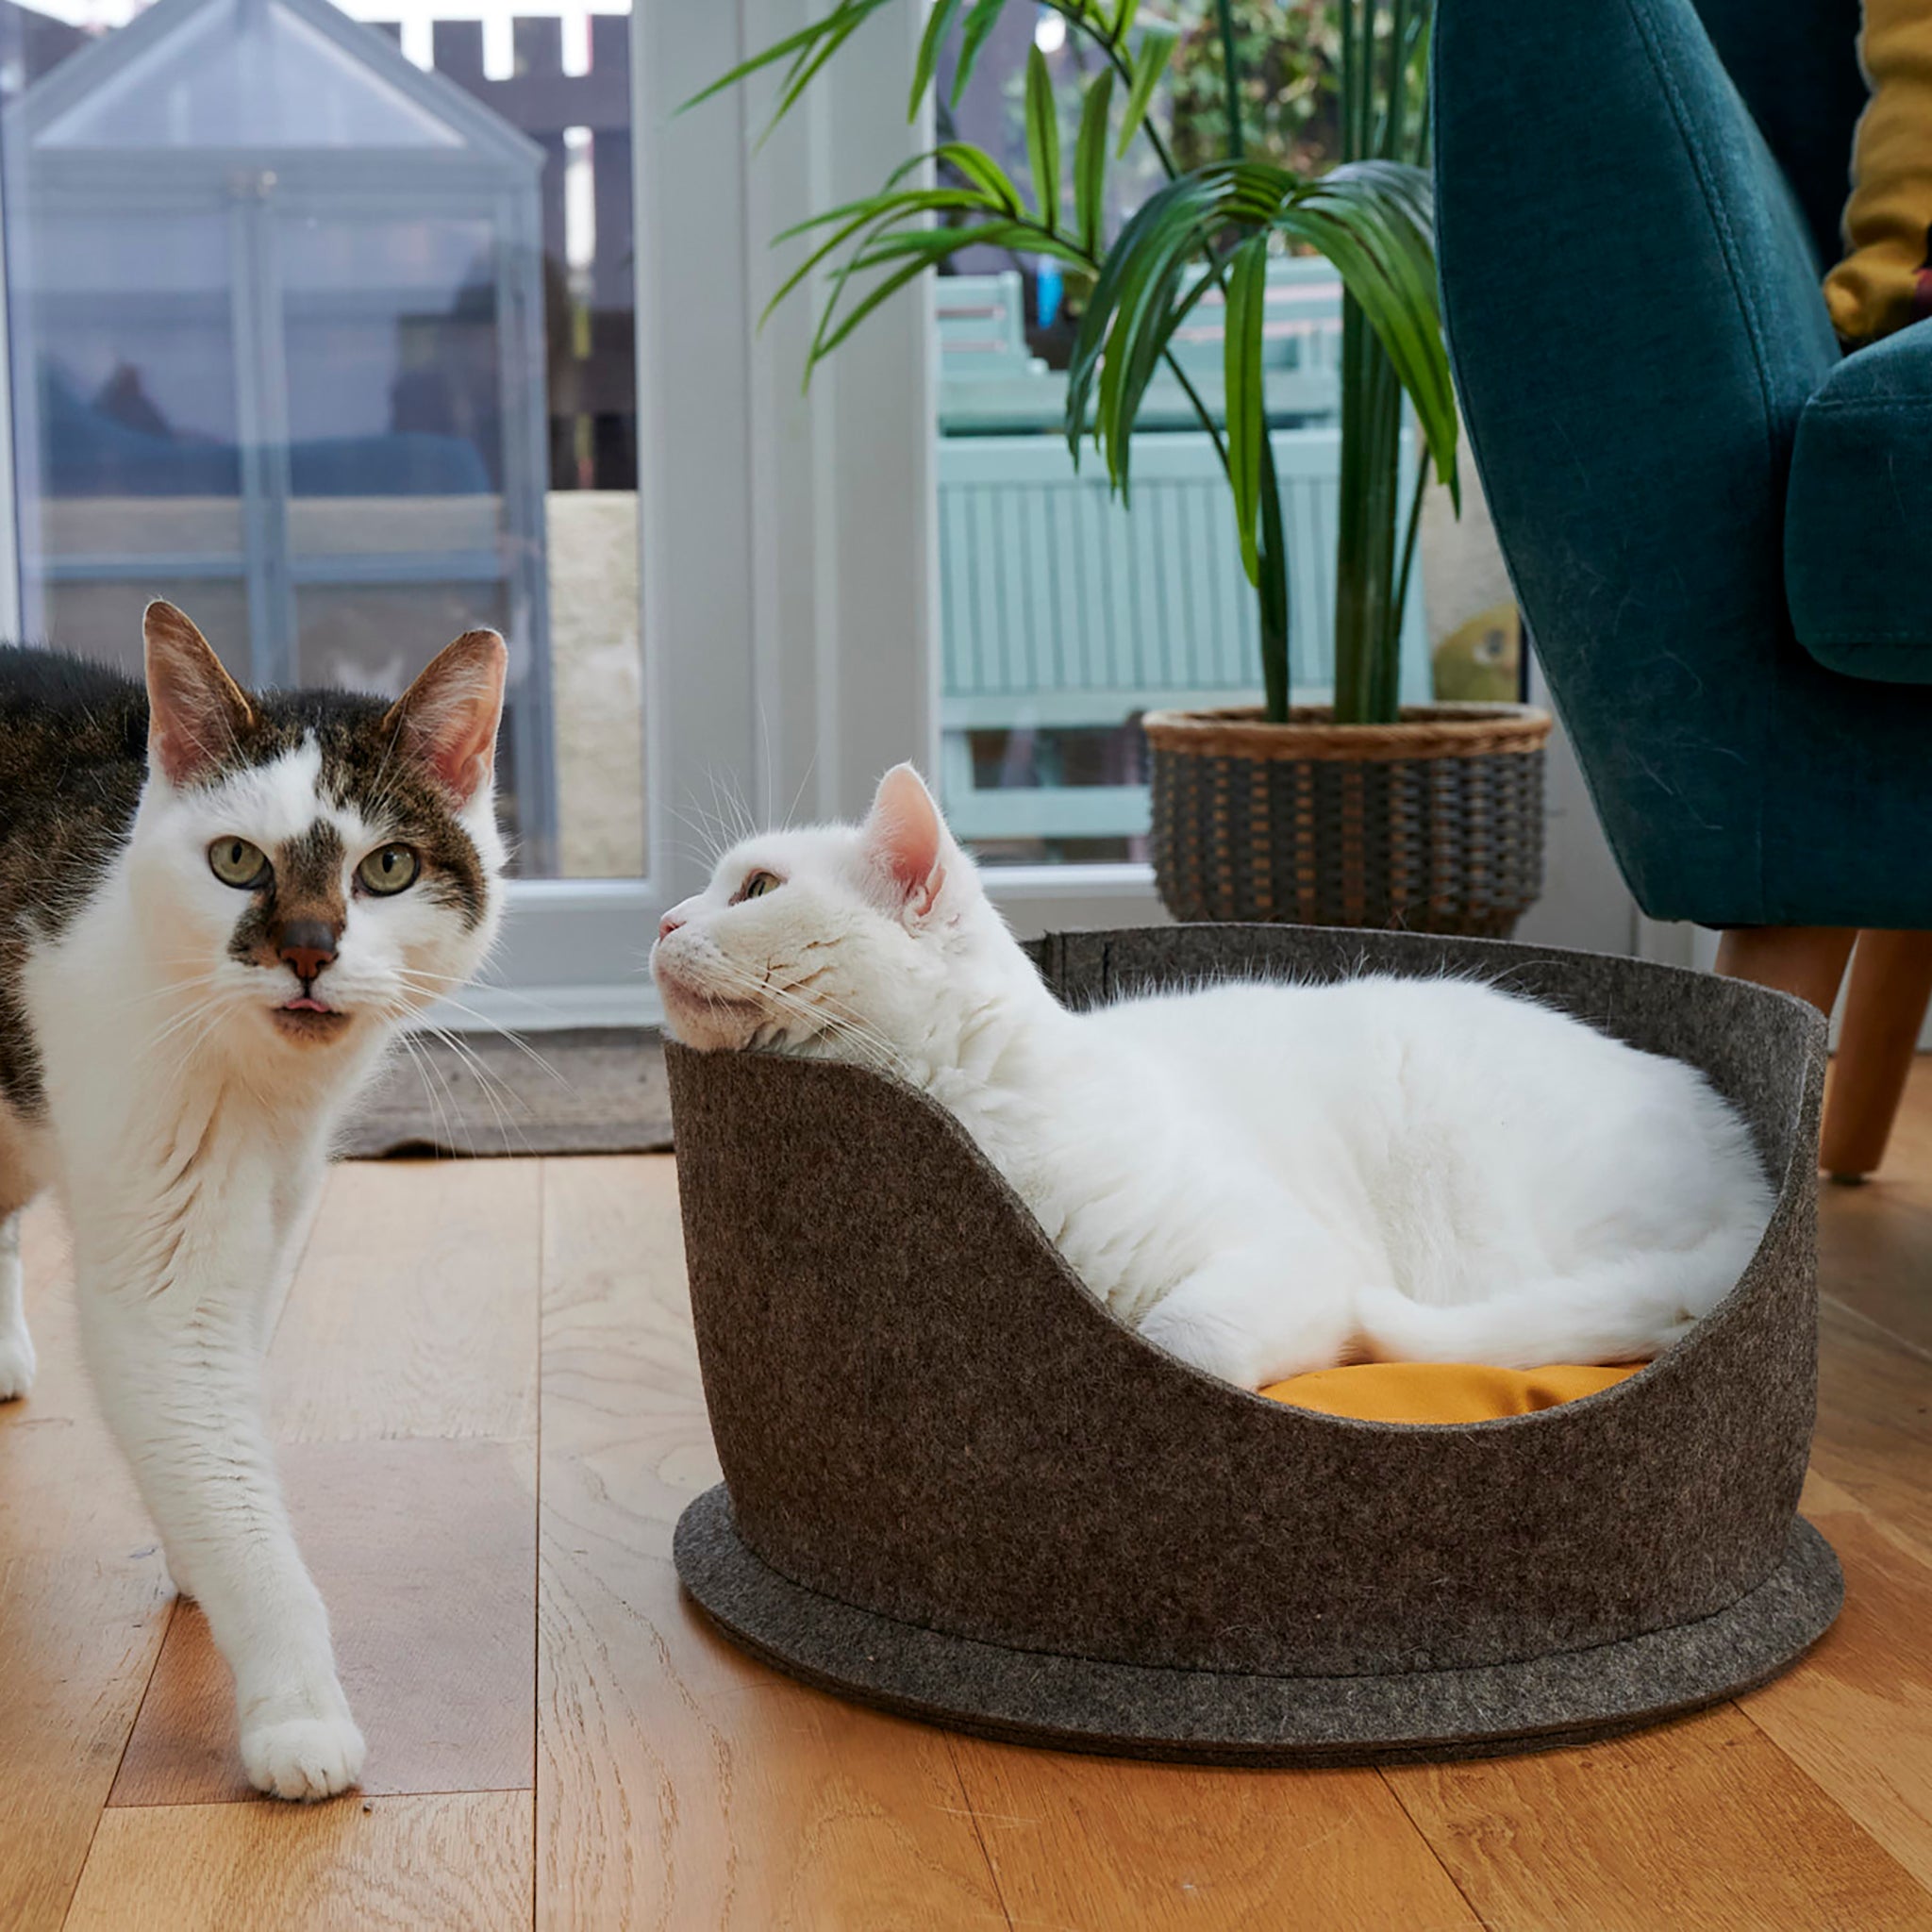 A white cat with yellow eyes, sitting inside a Chimney Sheep PteSnug wool felt cat bed. The bed is sitting on a wooden floor. There is a yellow wool filled cushion inside the bed. There is a black and white cat walking next to the cat inside the bed